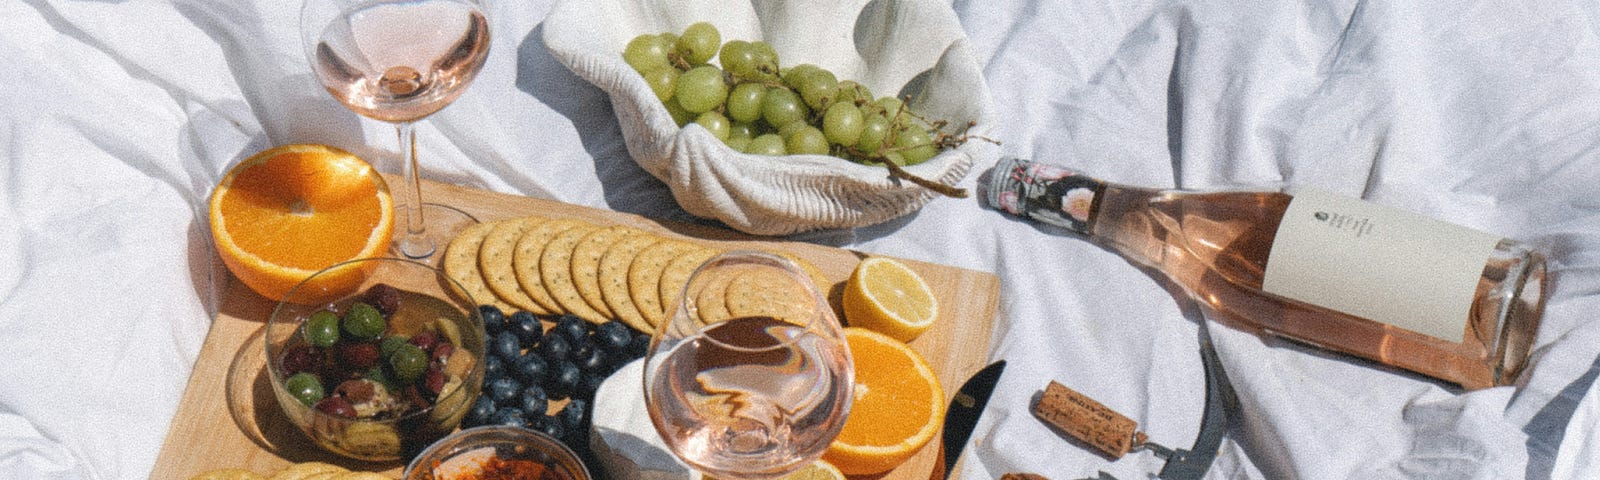 A picnic. Wine, grapes, orange, baguette, crackers, cheese, olives